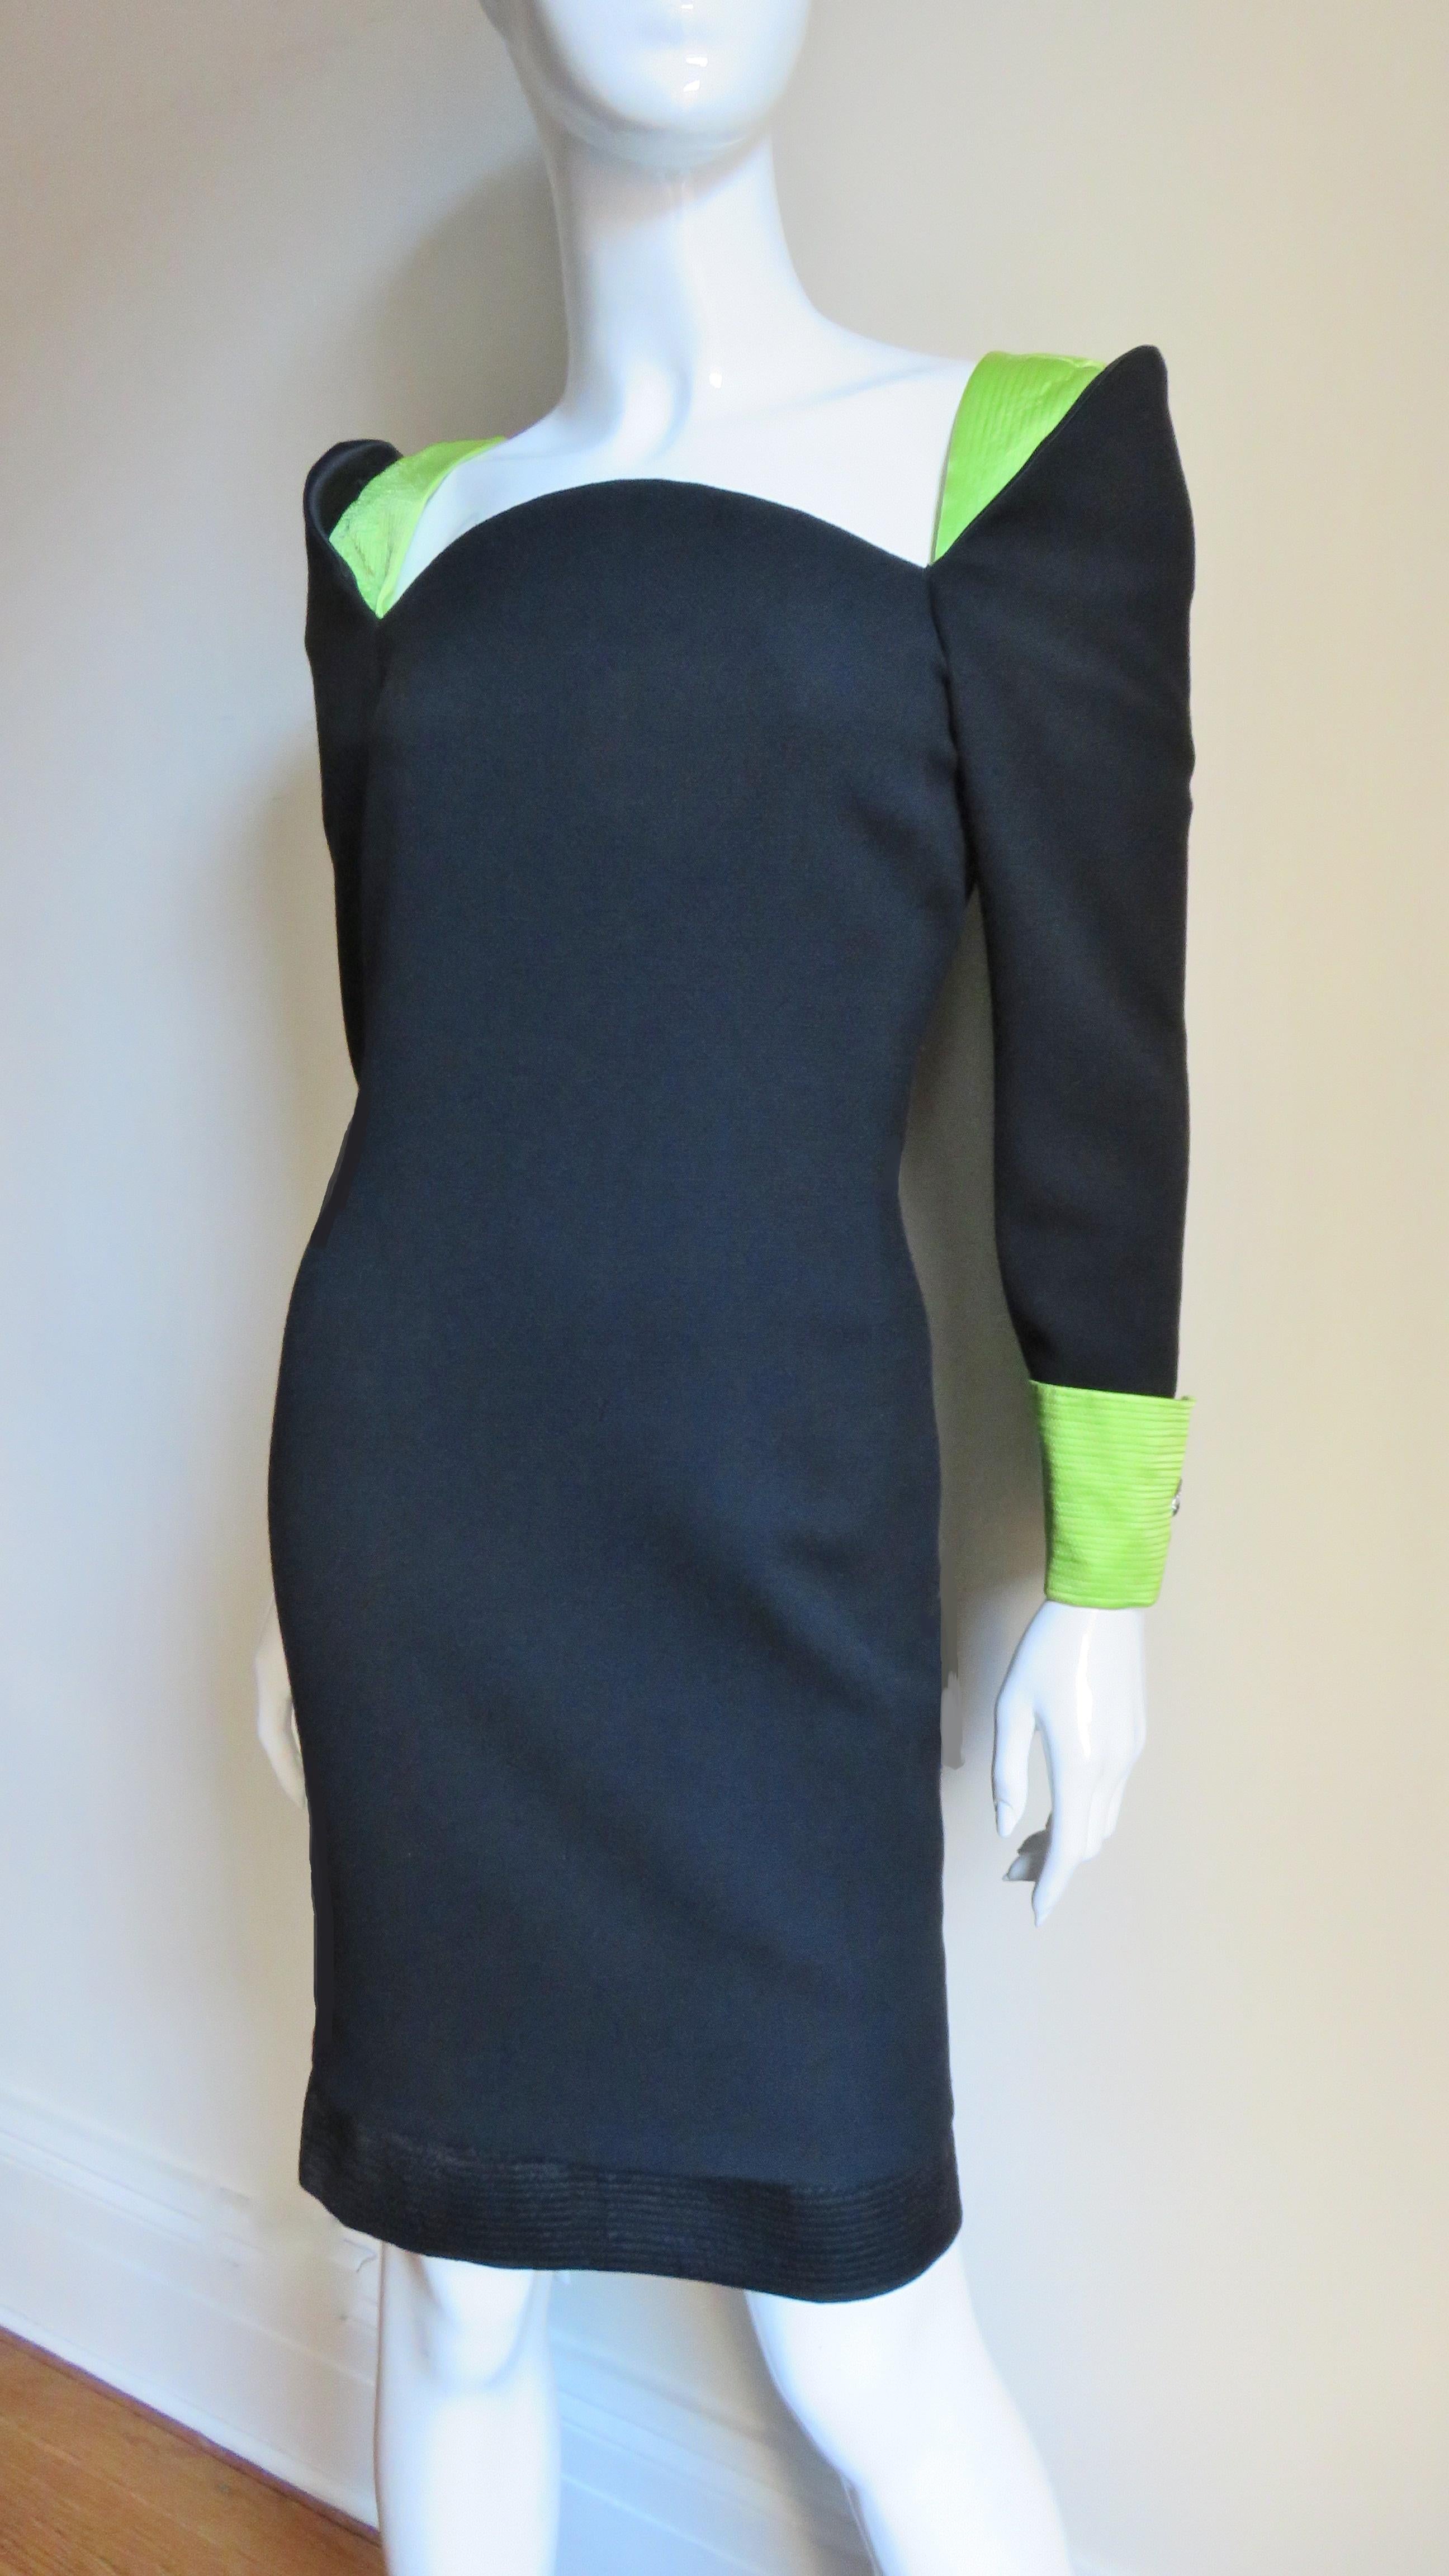 A fabulous dress from Gianni Versace Couture in black light weight wool and green silk.  It is semi fitted with fold back cuffs with elaborate cufflinks and inset shoulders all in bright green silk highlighted with rows of top stitching. The dress